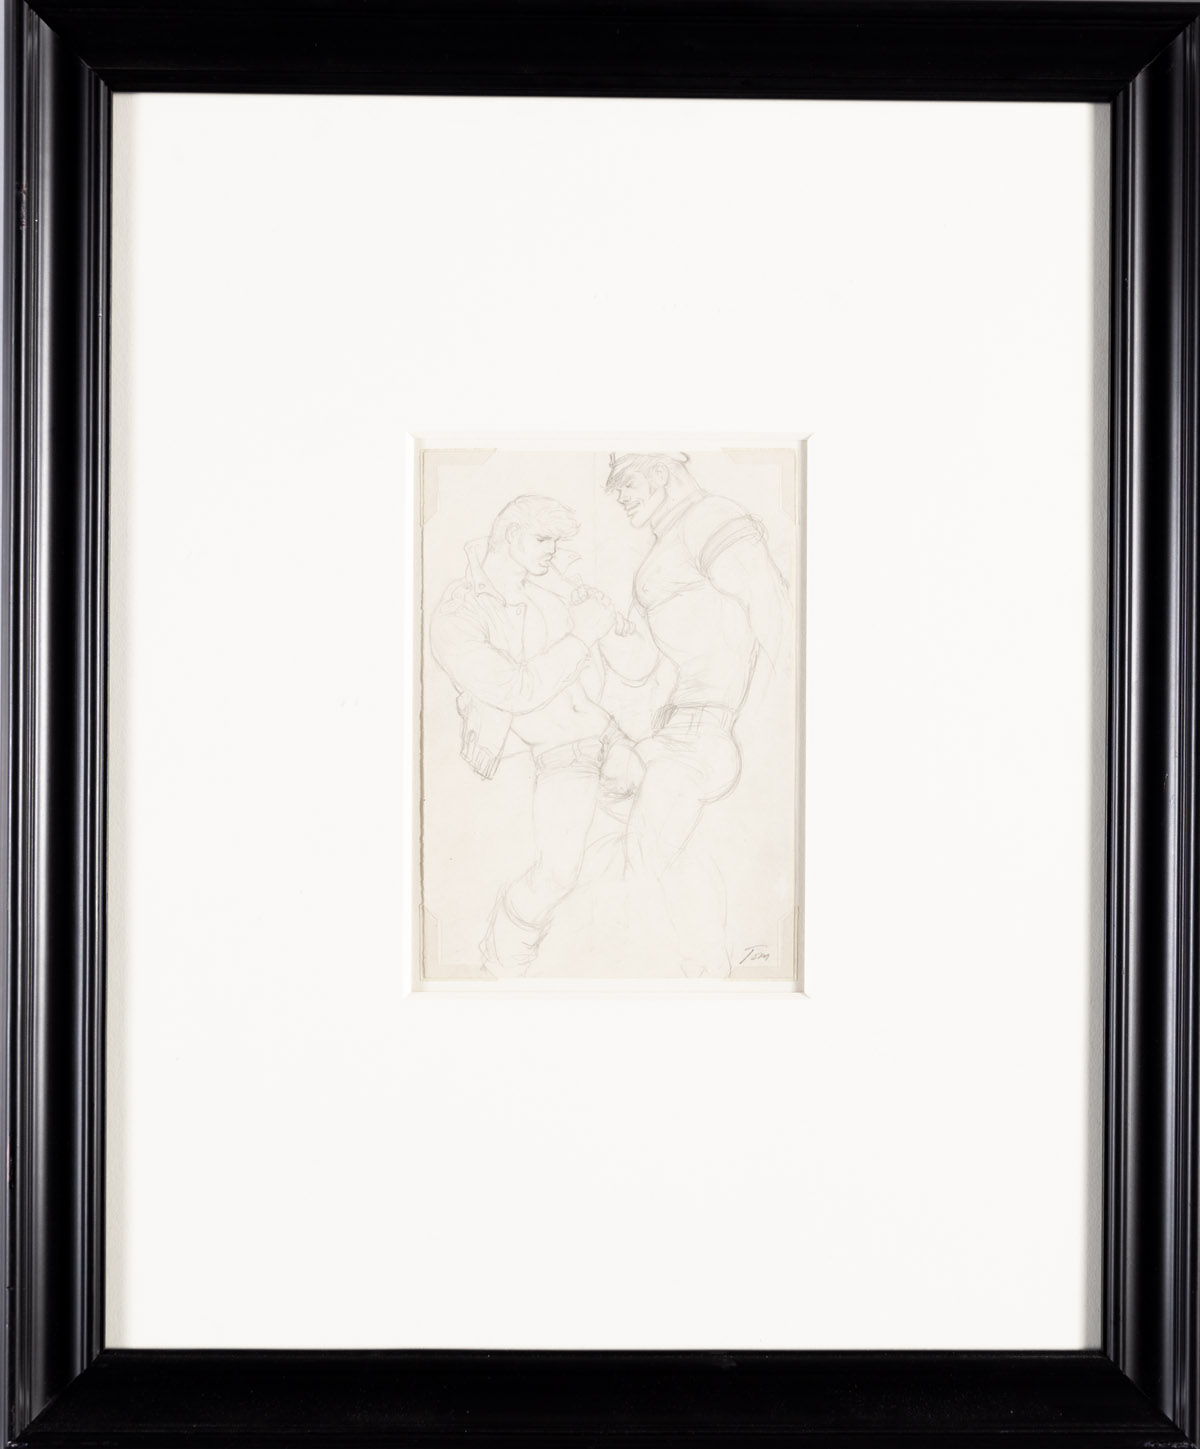 TOM OF FINLAND (1920-1991) Untitled (Preparatory drawing).